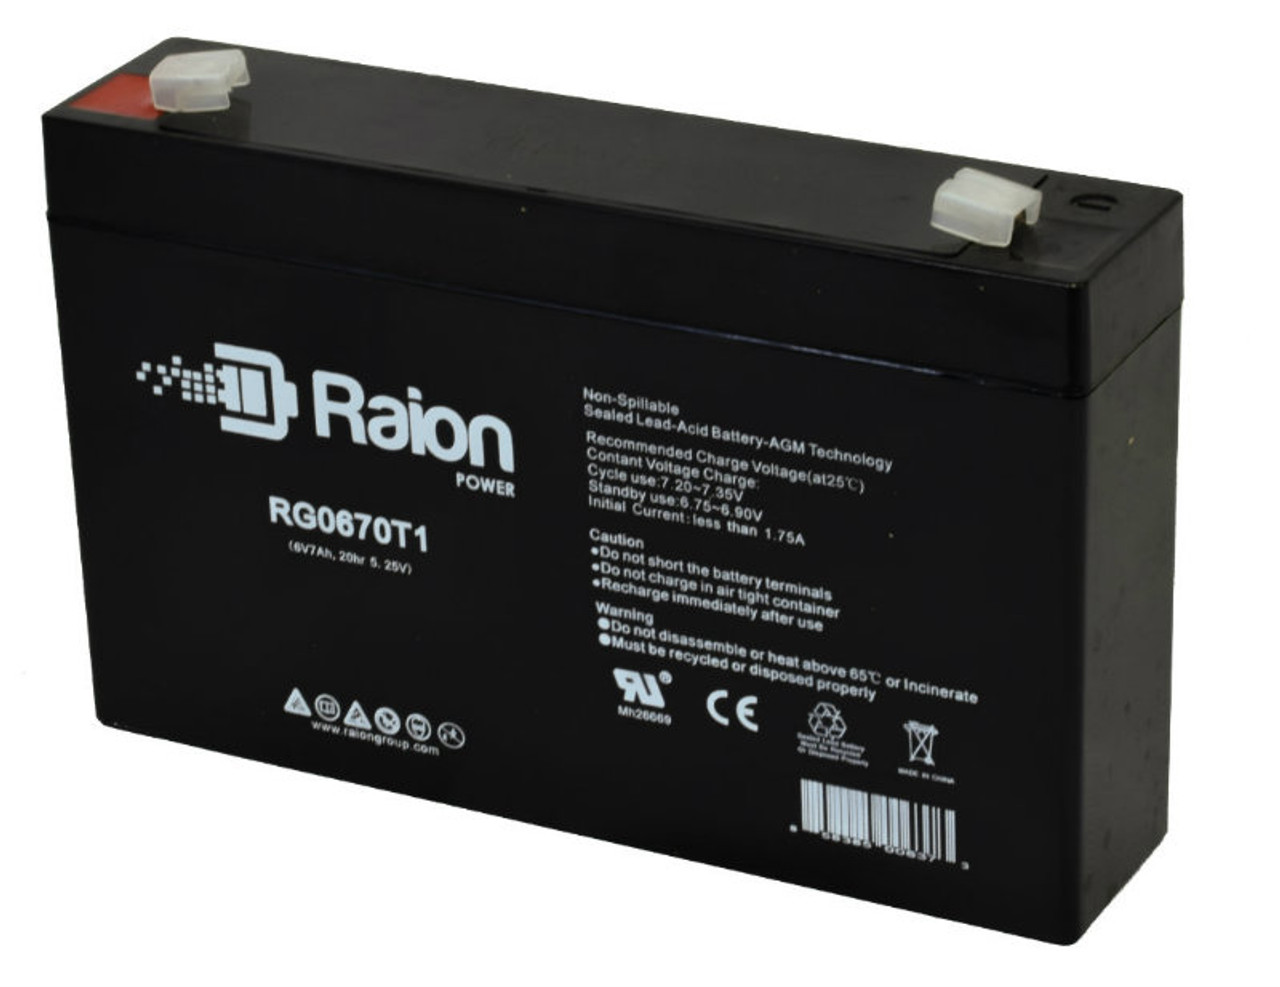 Raion Power RG0670T1 Replacement Battery for Sonnenschein 719046500 OEM Battery